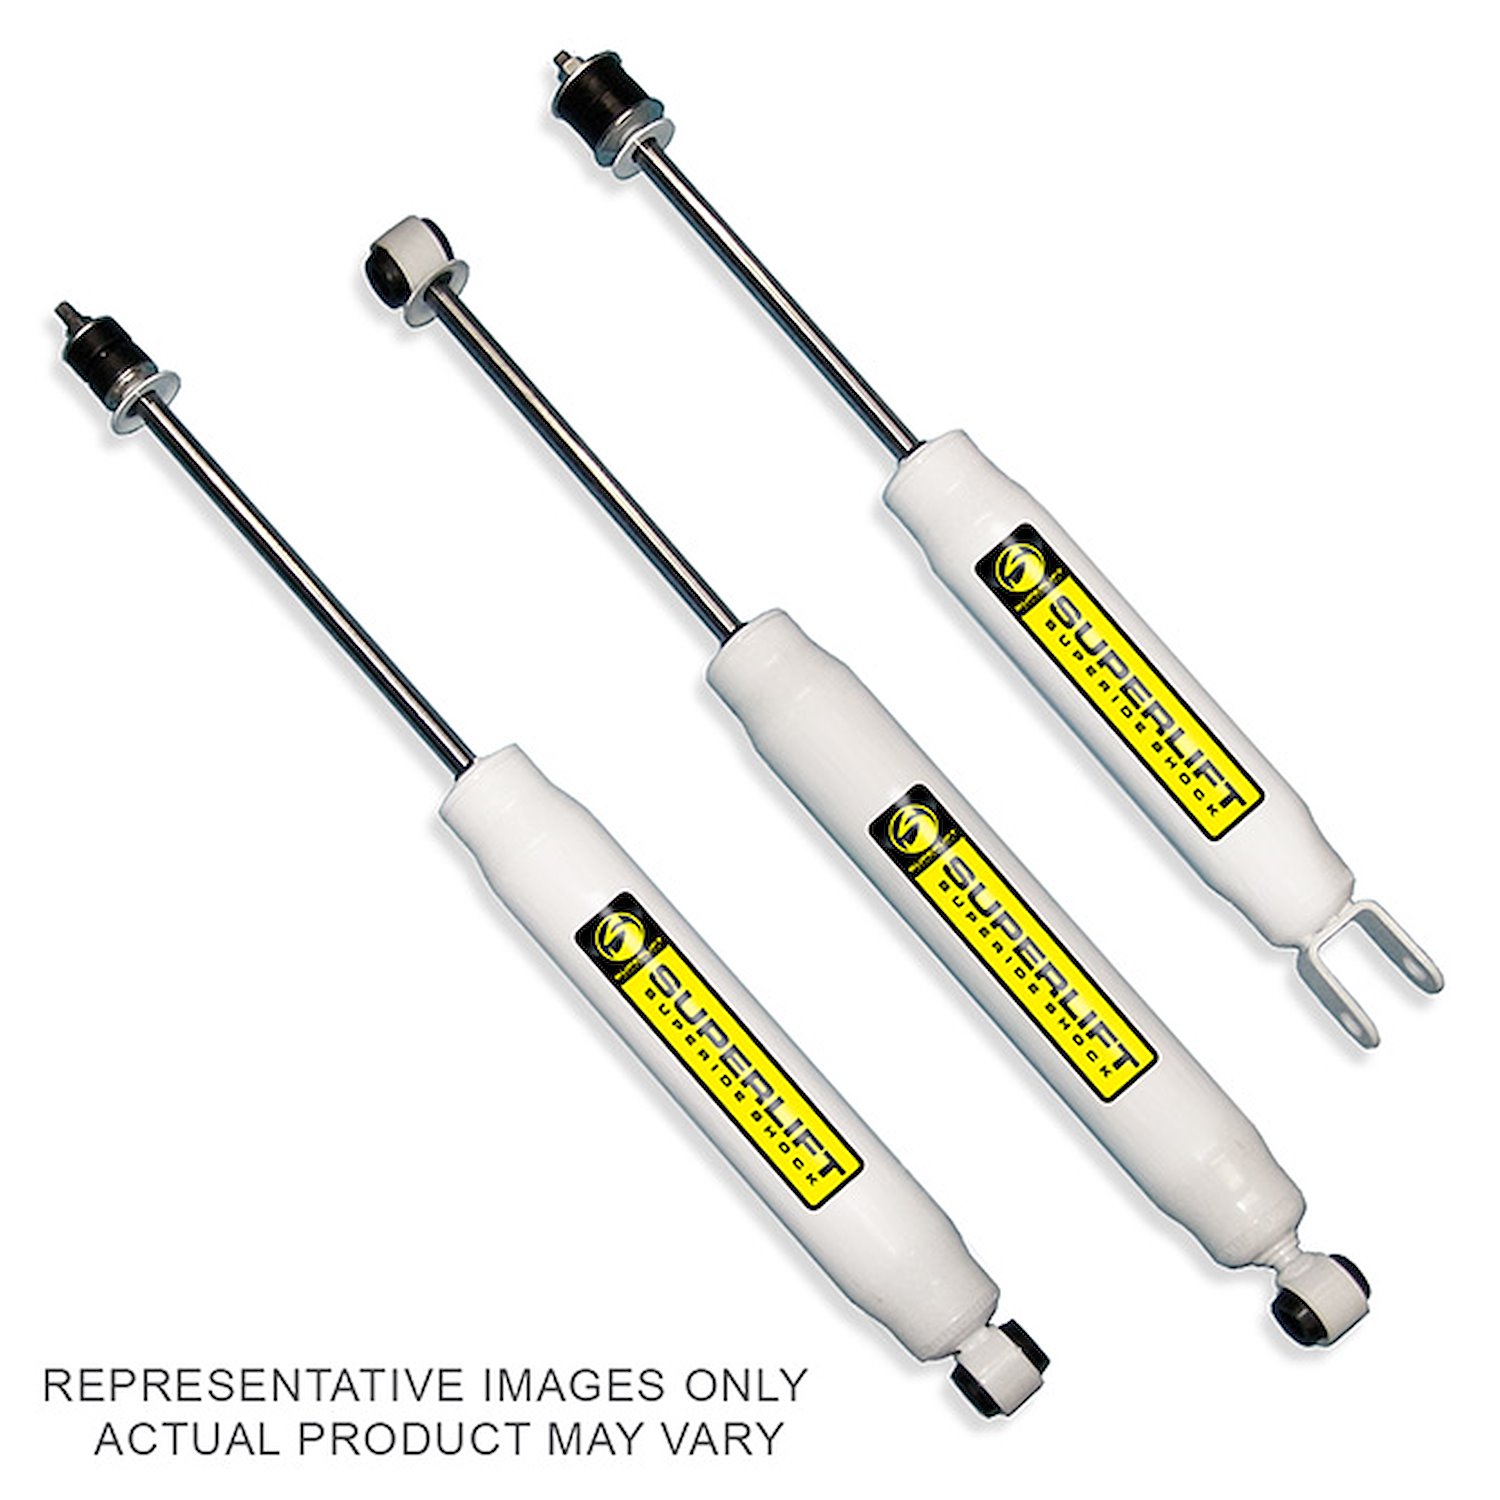 Superide Shock Absorber Extended Length: 26.070 in.